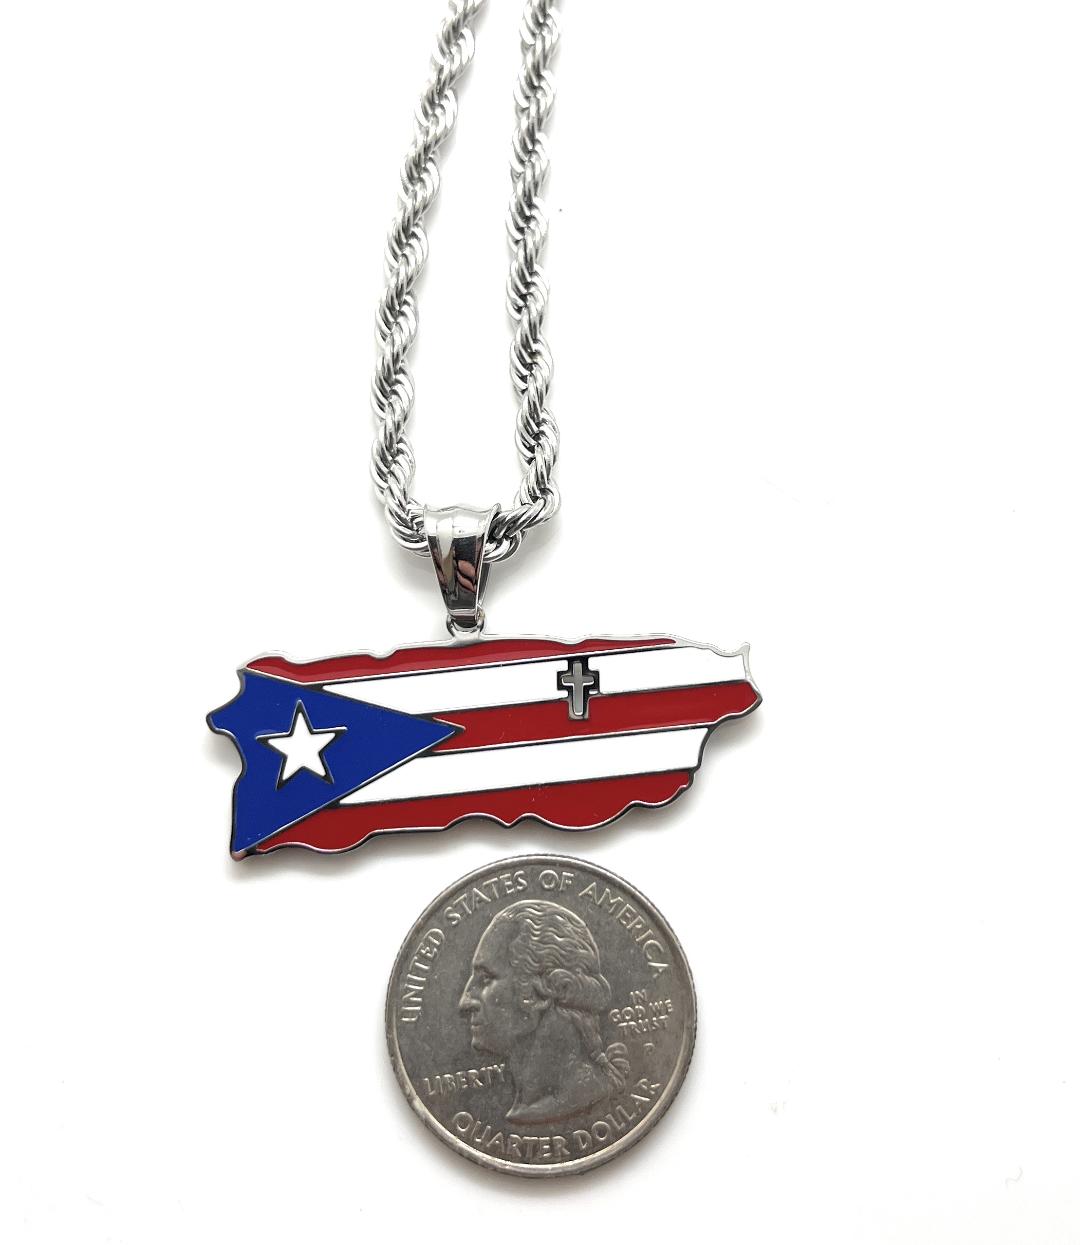 Puerto Rico God Bless Necklace